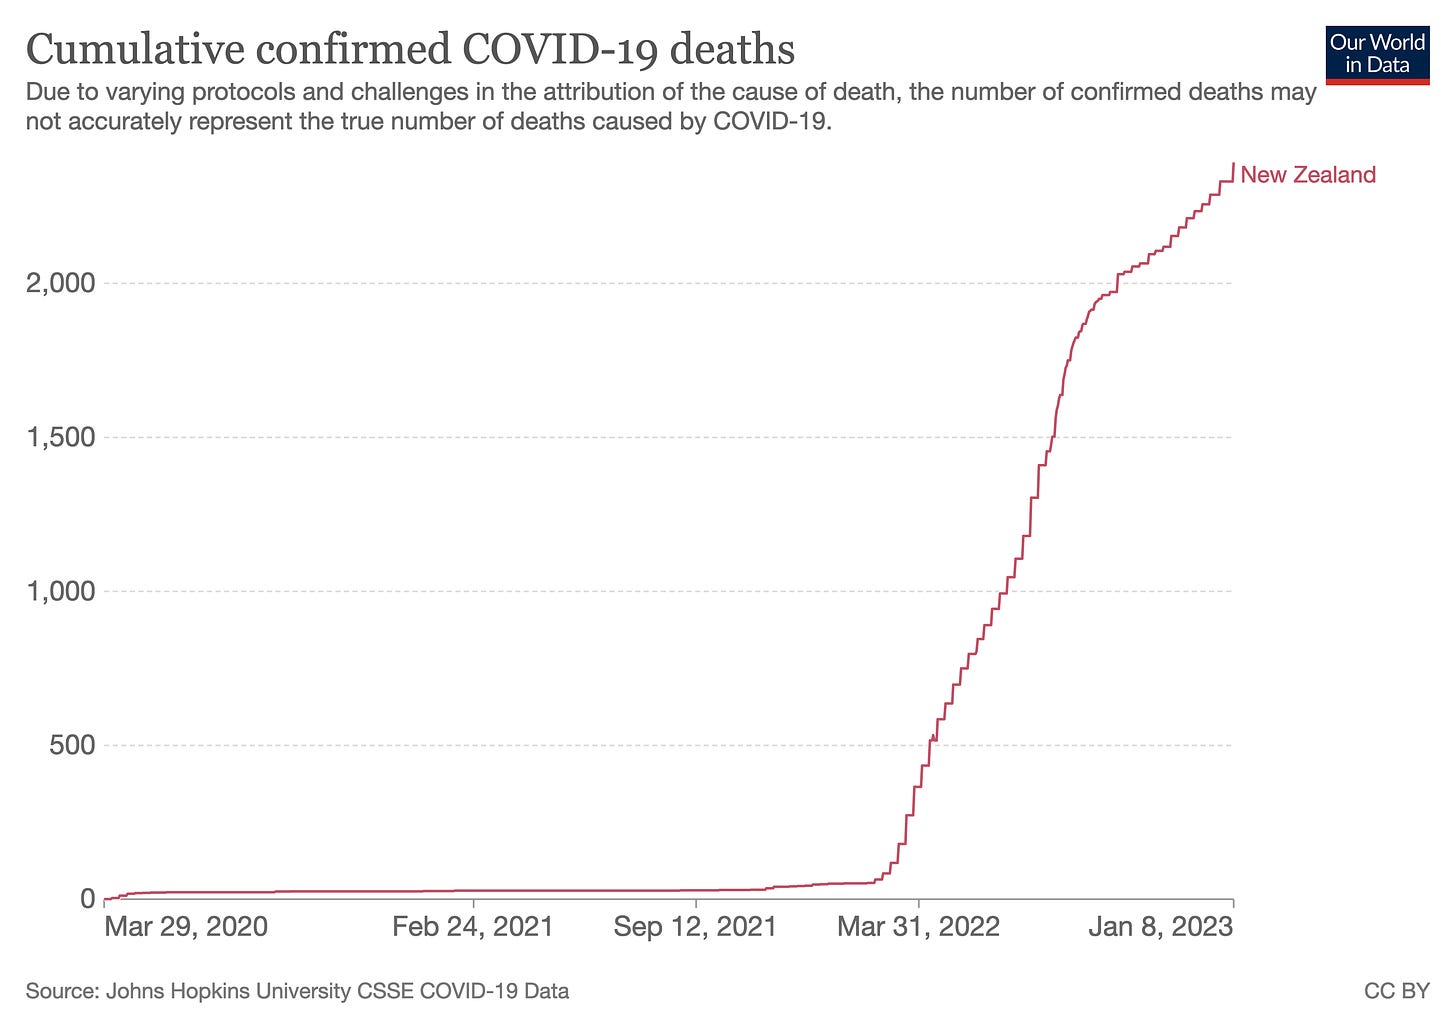 https://ourworldindata.org/covid-deaths?country=~NZL#what-is-the-cumulative-number-of-confirmed-deaths